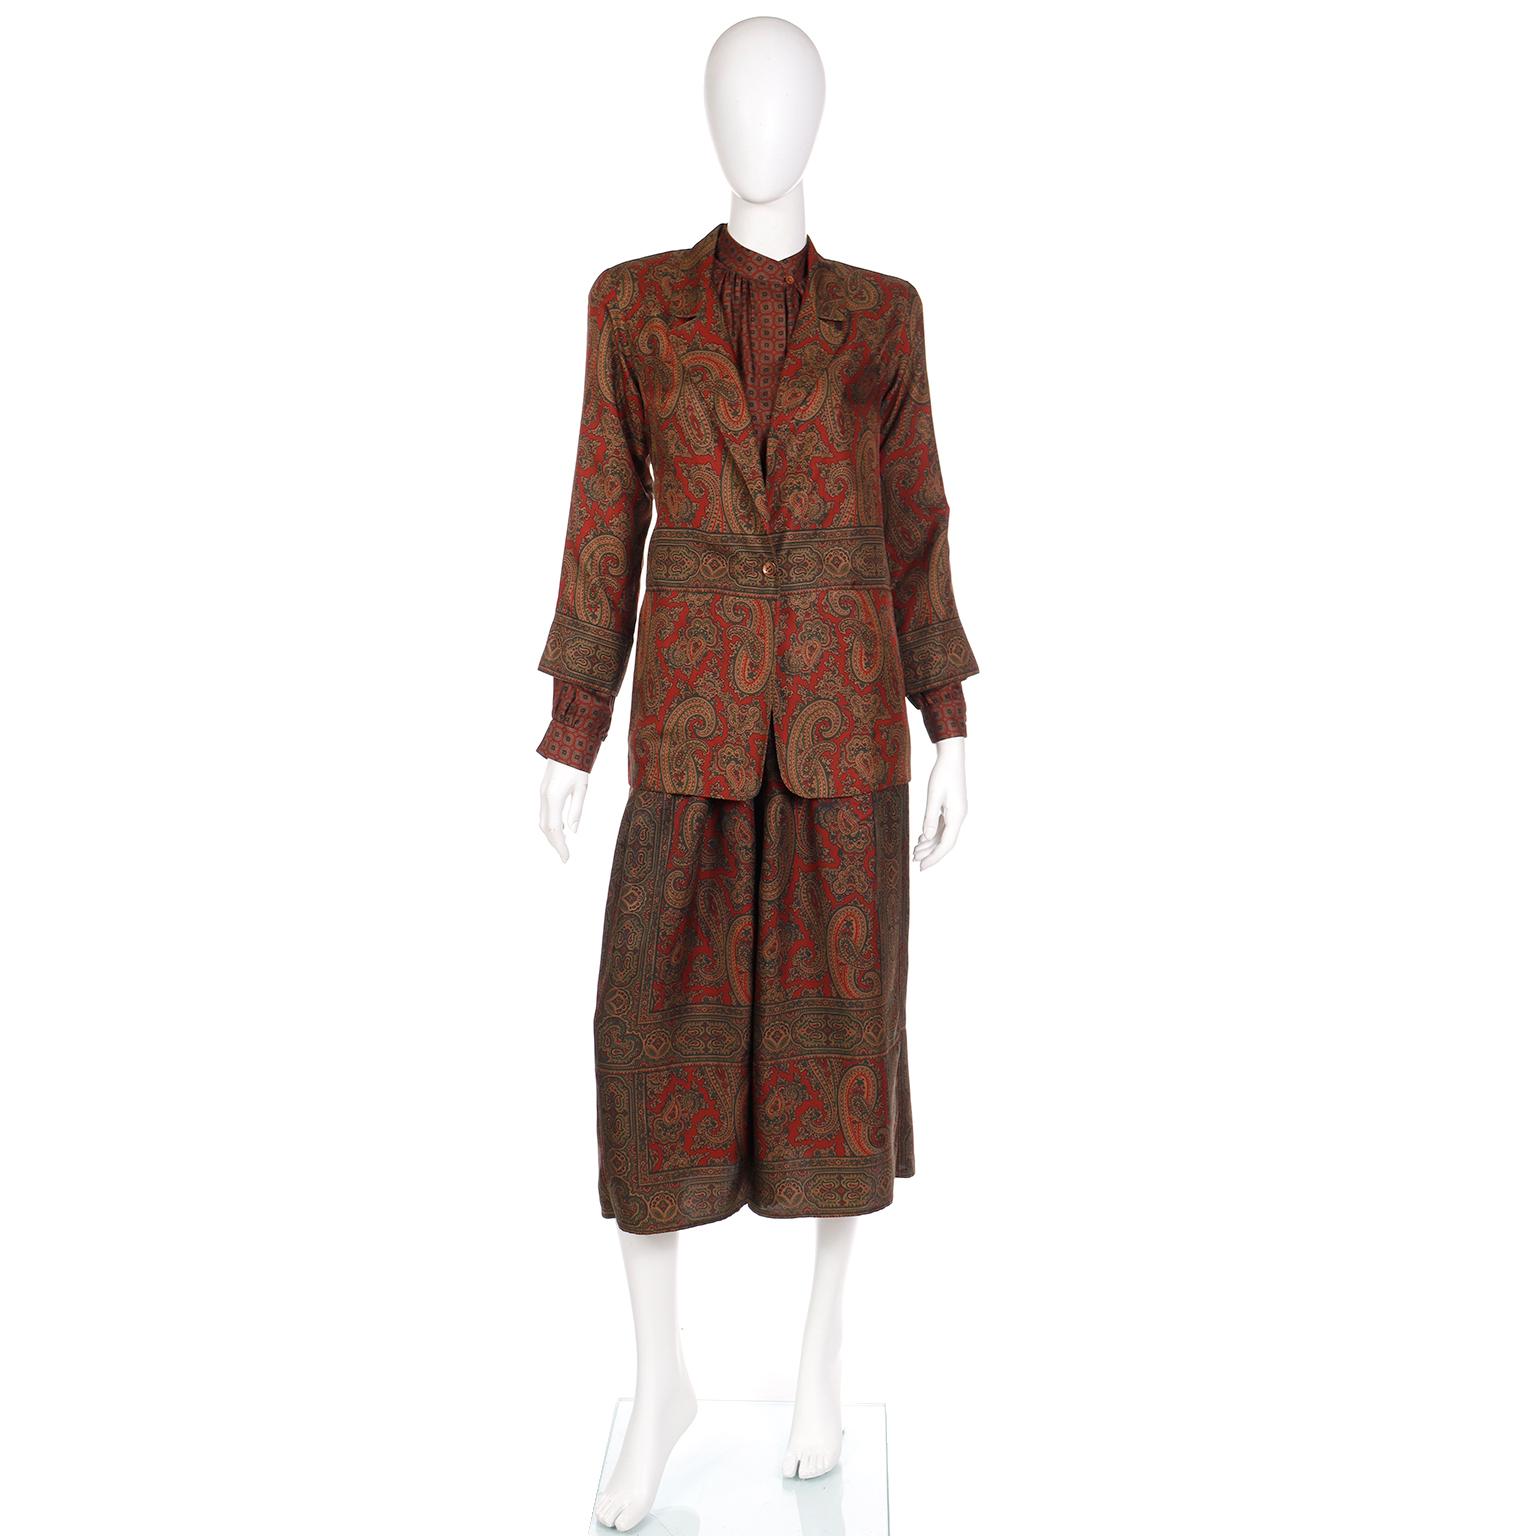 This is a lovely 3 piece Anne Klein outfit from the late 1970's. Designed during Donna Karan's time at Anne Klein, this is a versatile outfit that can be worn as an outfit or as separates. The ensemble includes a silk jacket and skirt in a matching